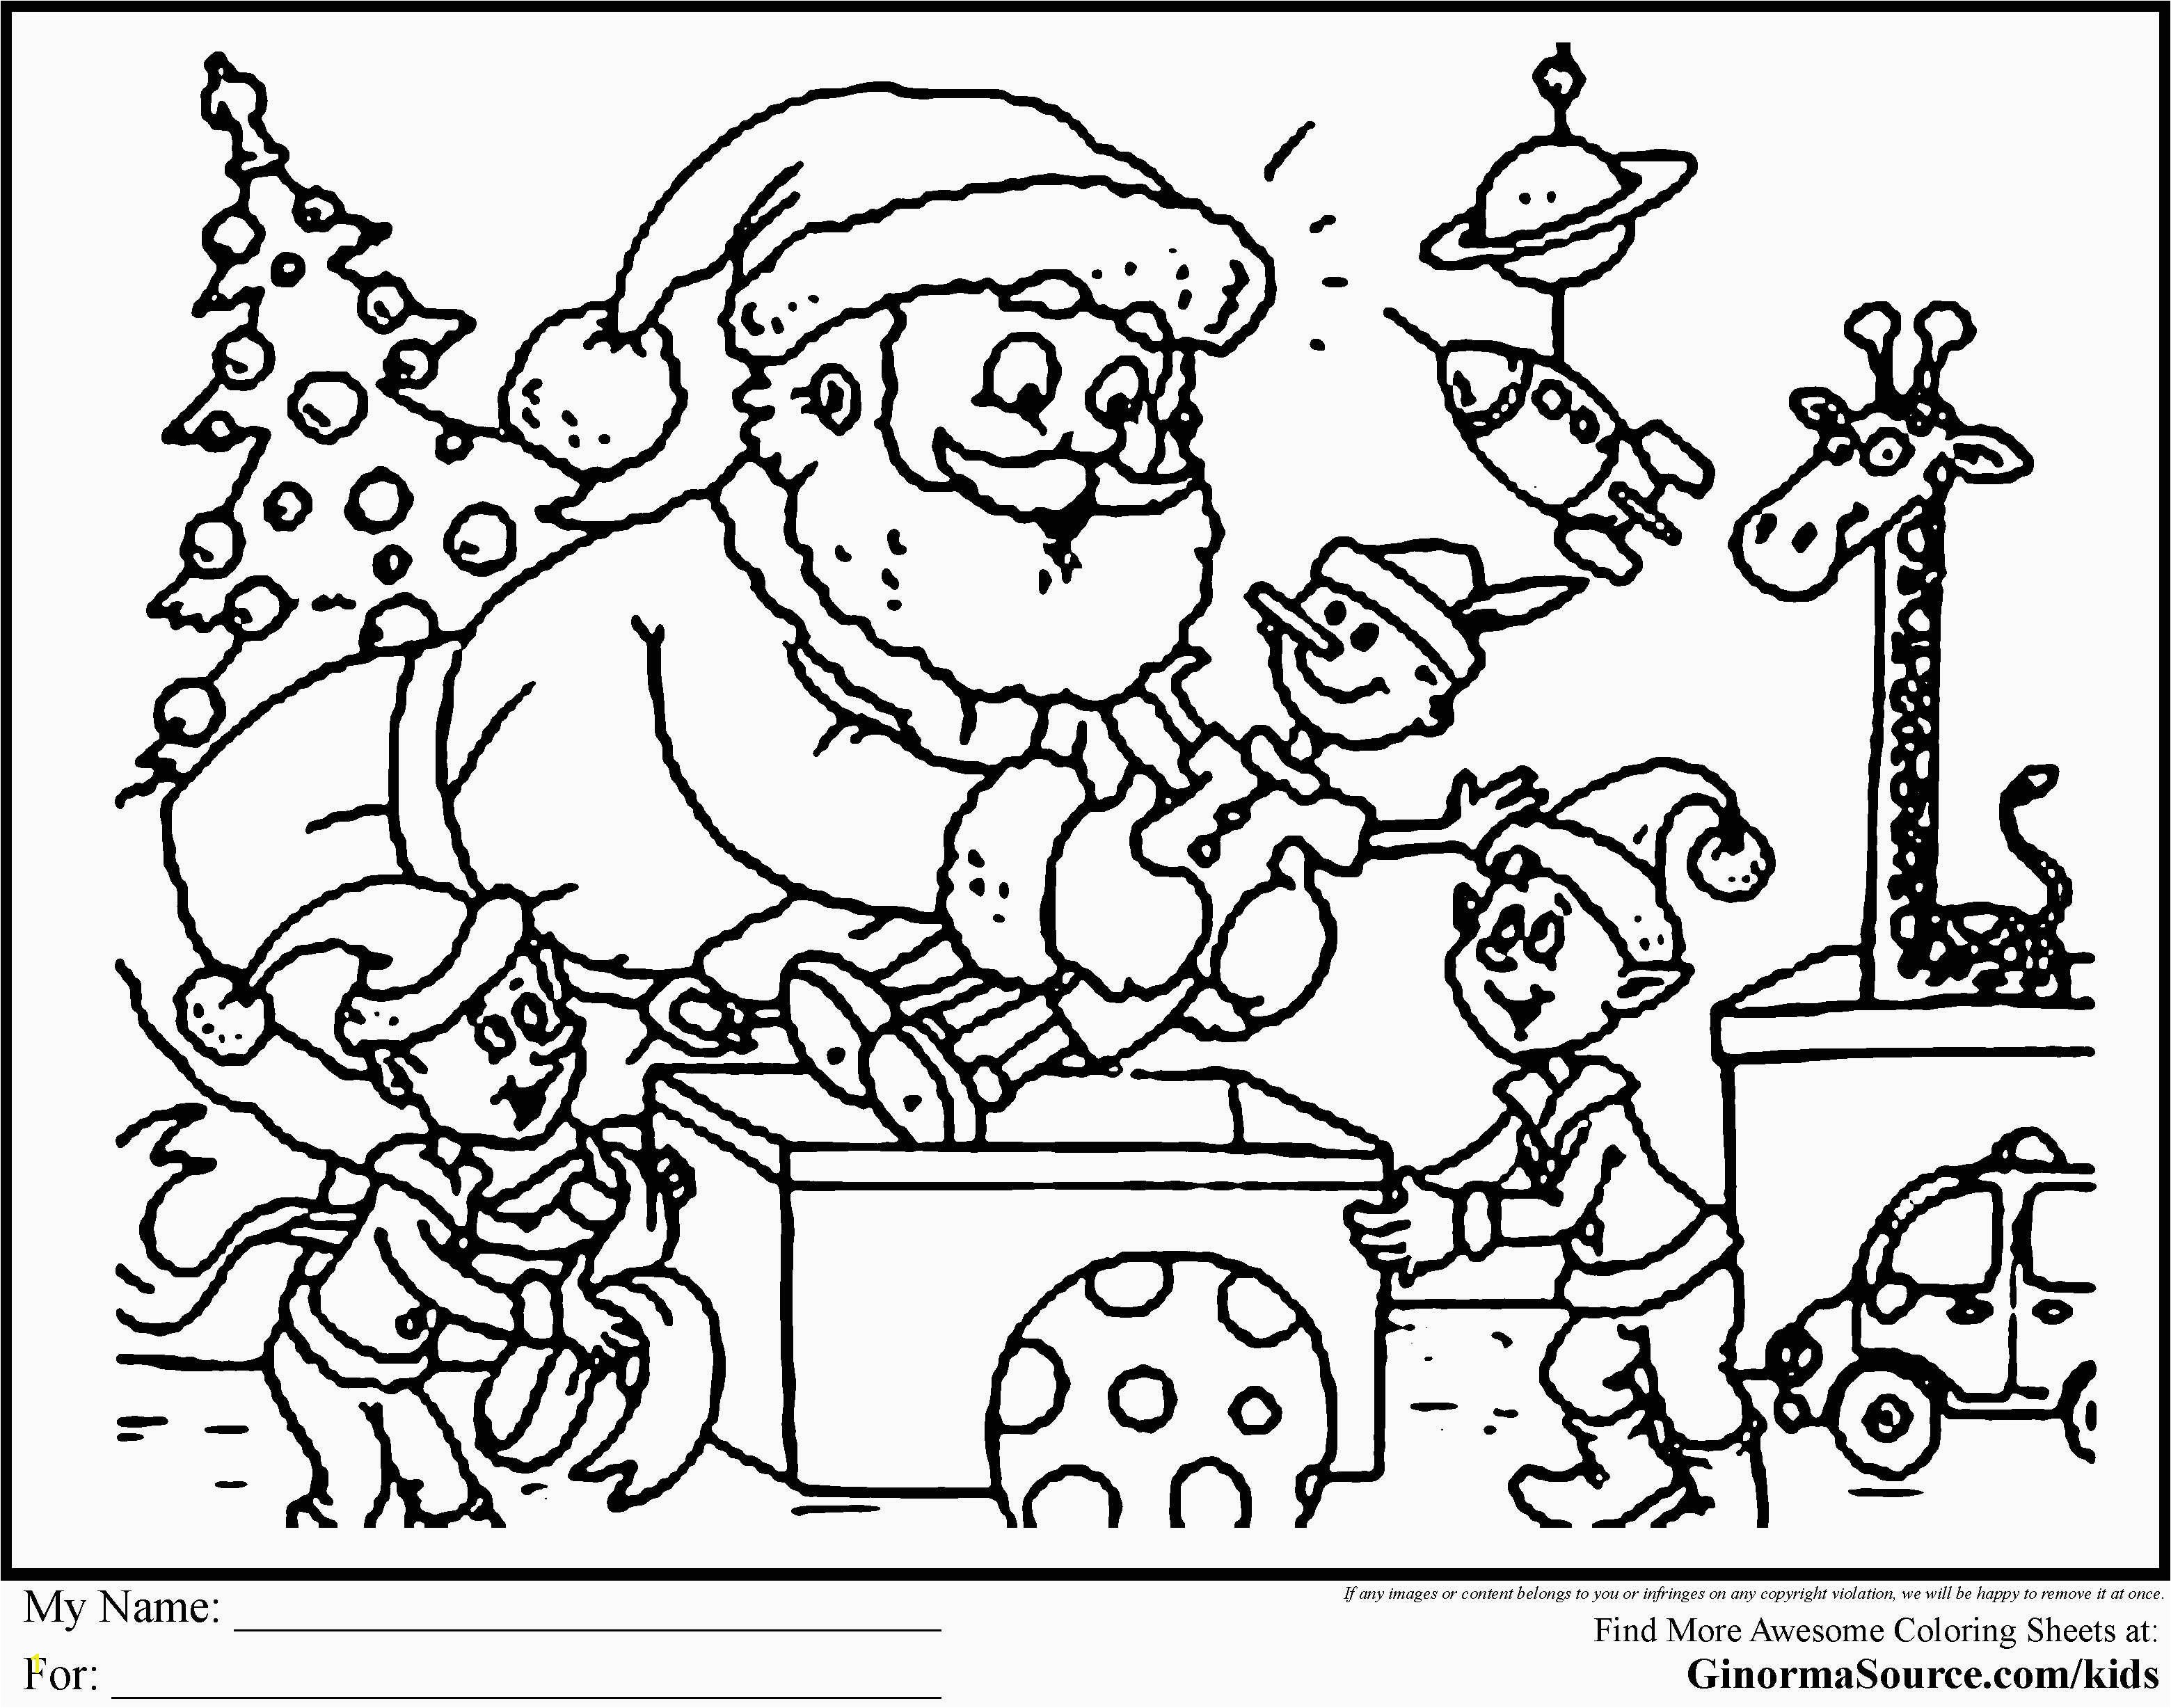 Coloring Pages Abc S Print Coloring Pages Abc 123 Awesome Coloring Pages for Print